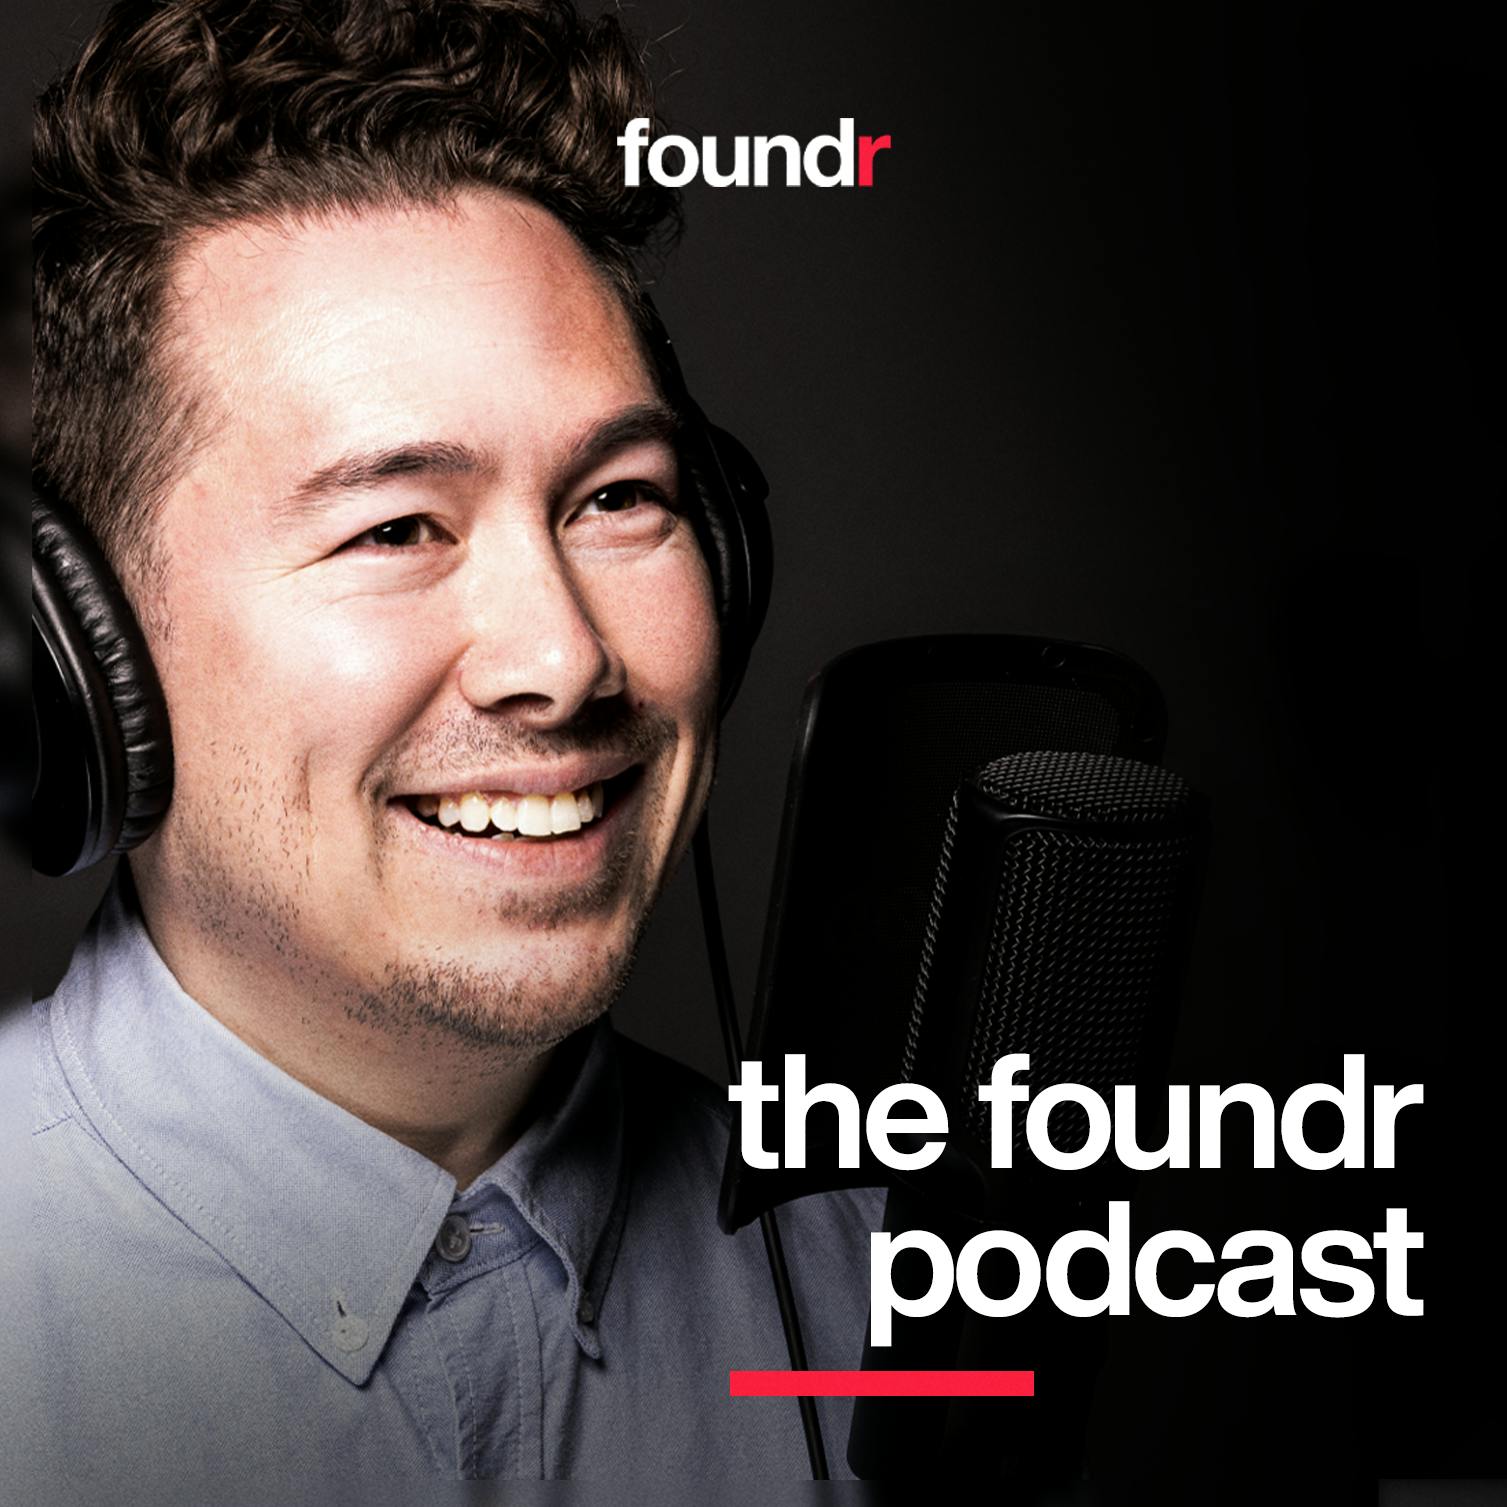 07: Reverse gears - Yaro Starak Interviews Nathan on the Story behind Foundr and creating a successful media startup